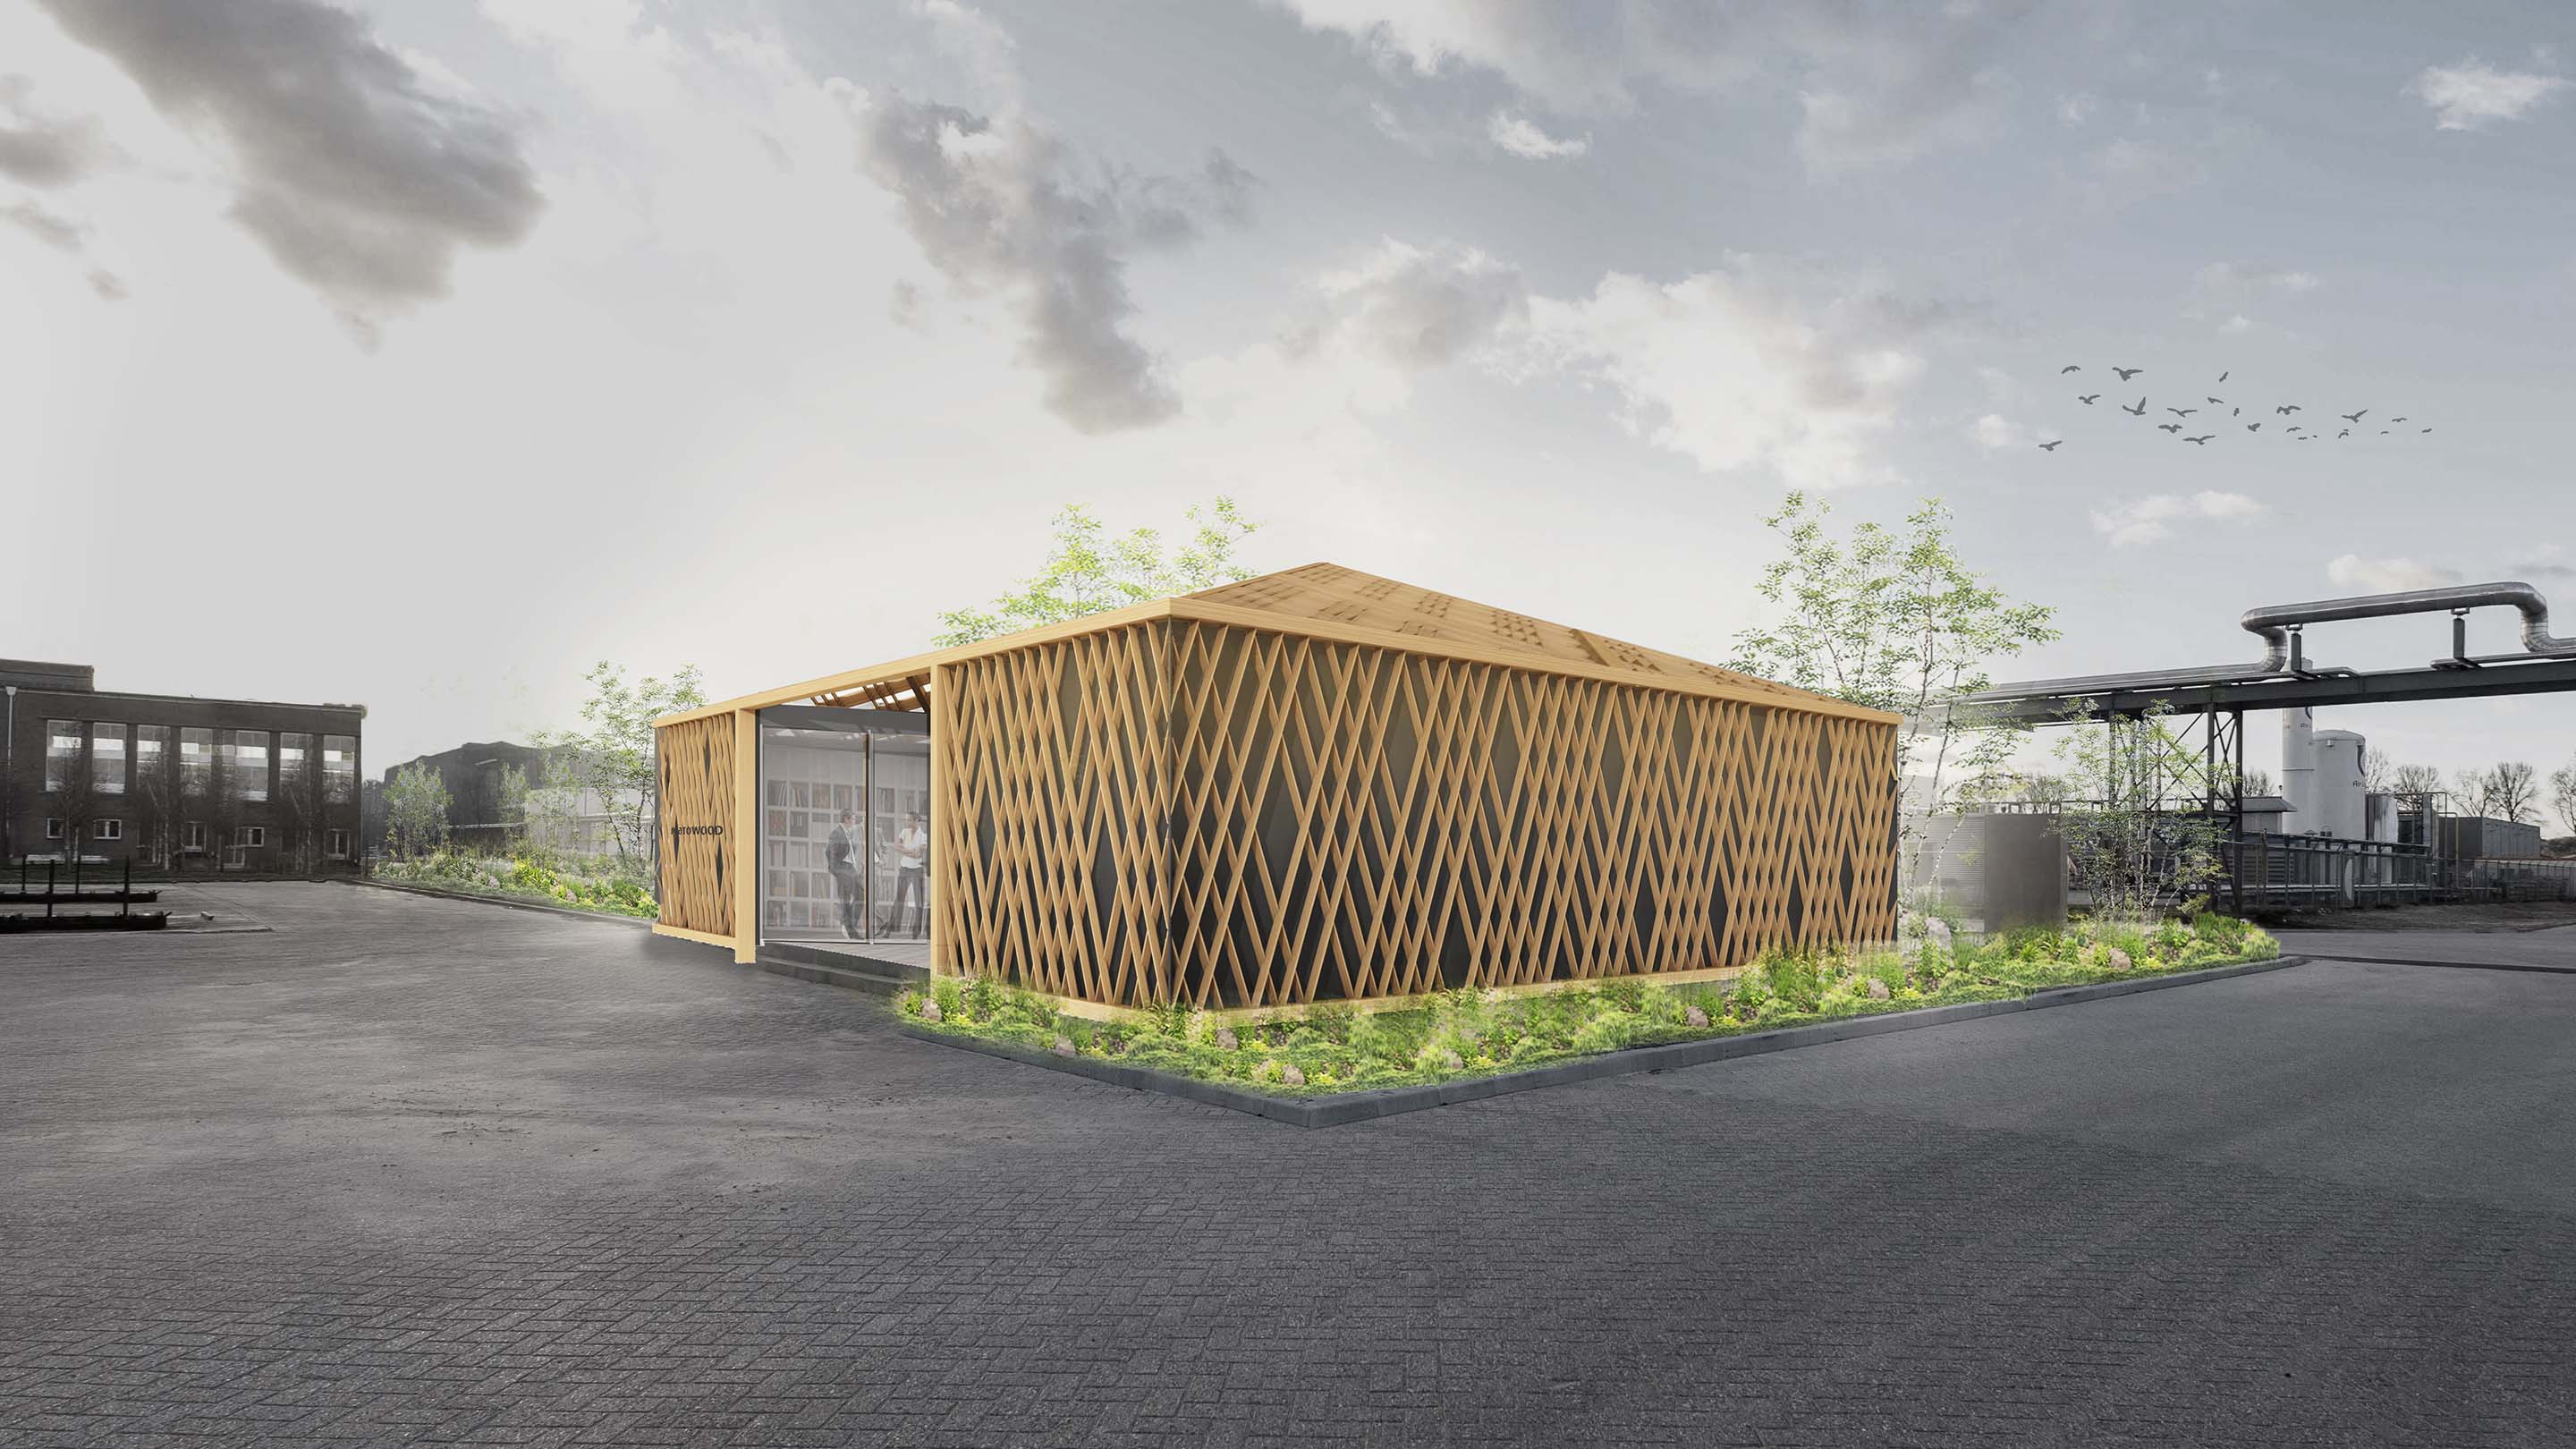 A pavilion is gently wrapped in wooden panels and lights delicately like a lighting basket